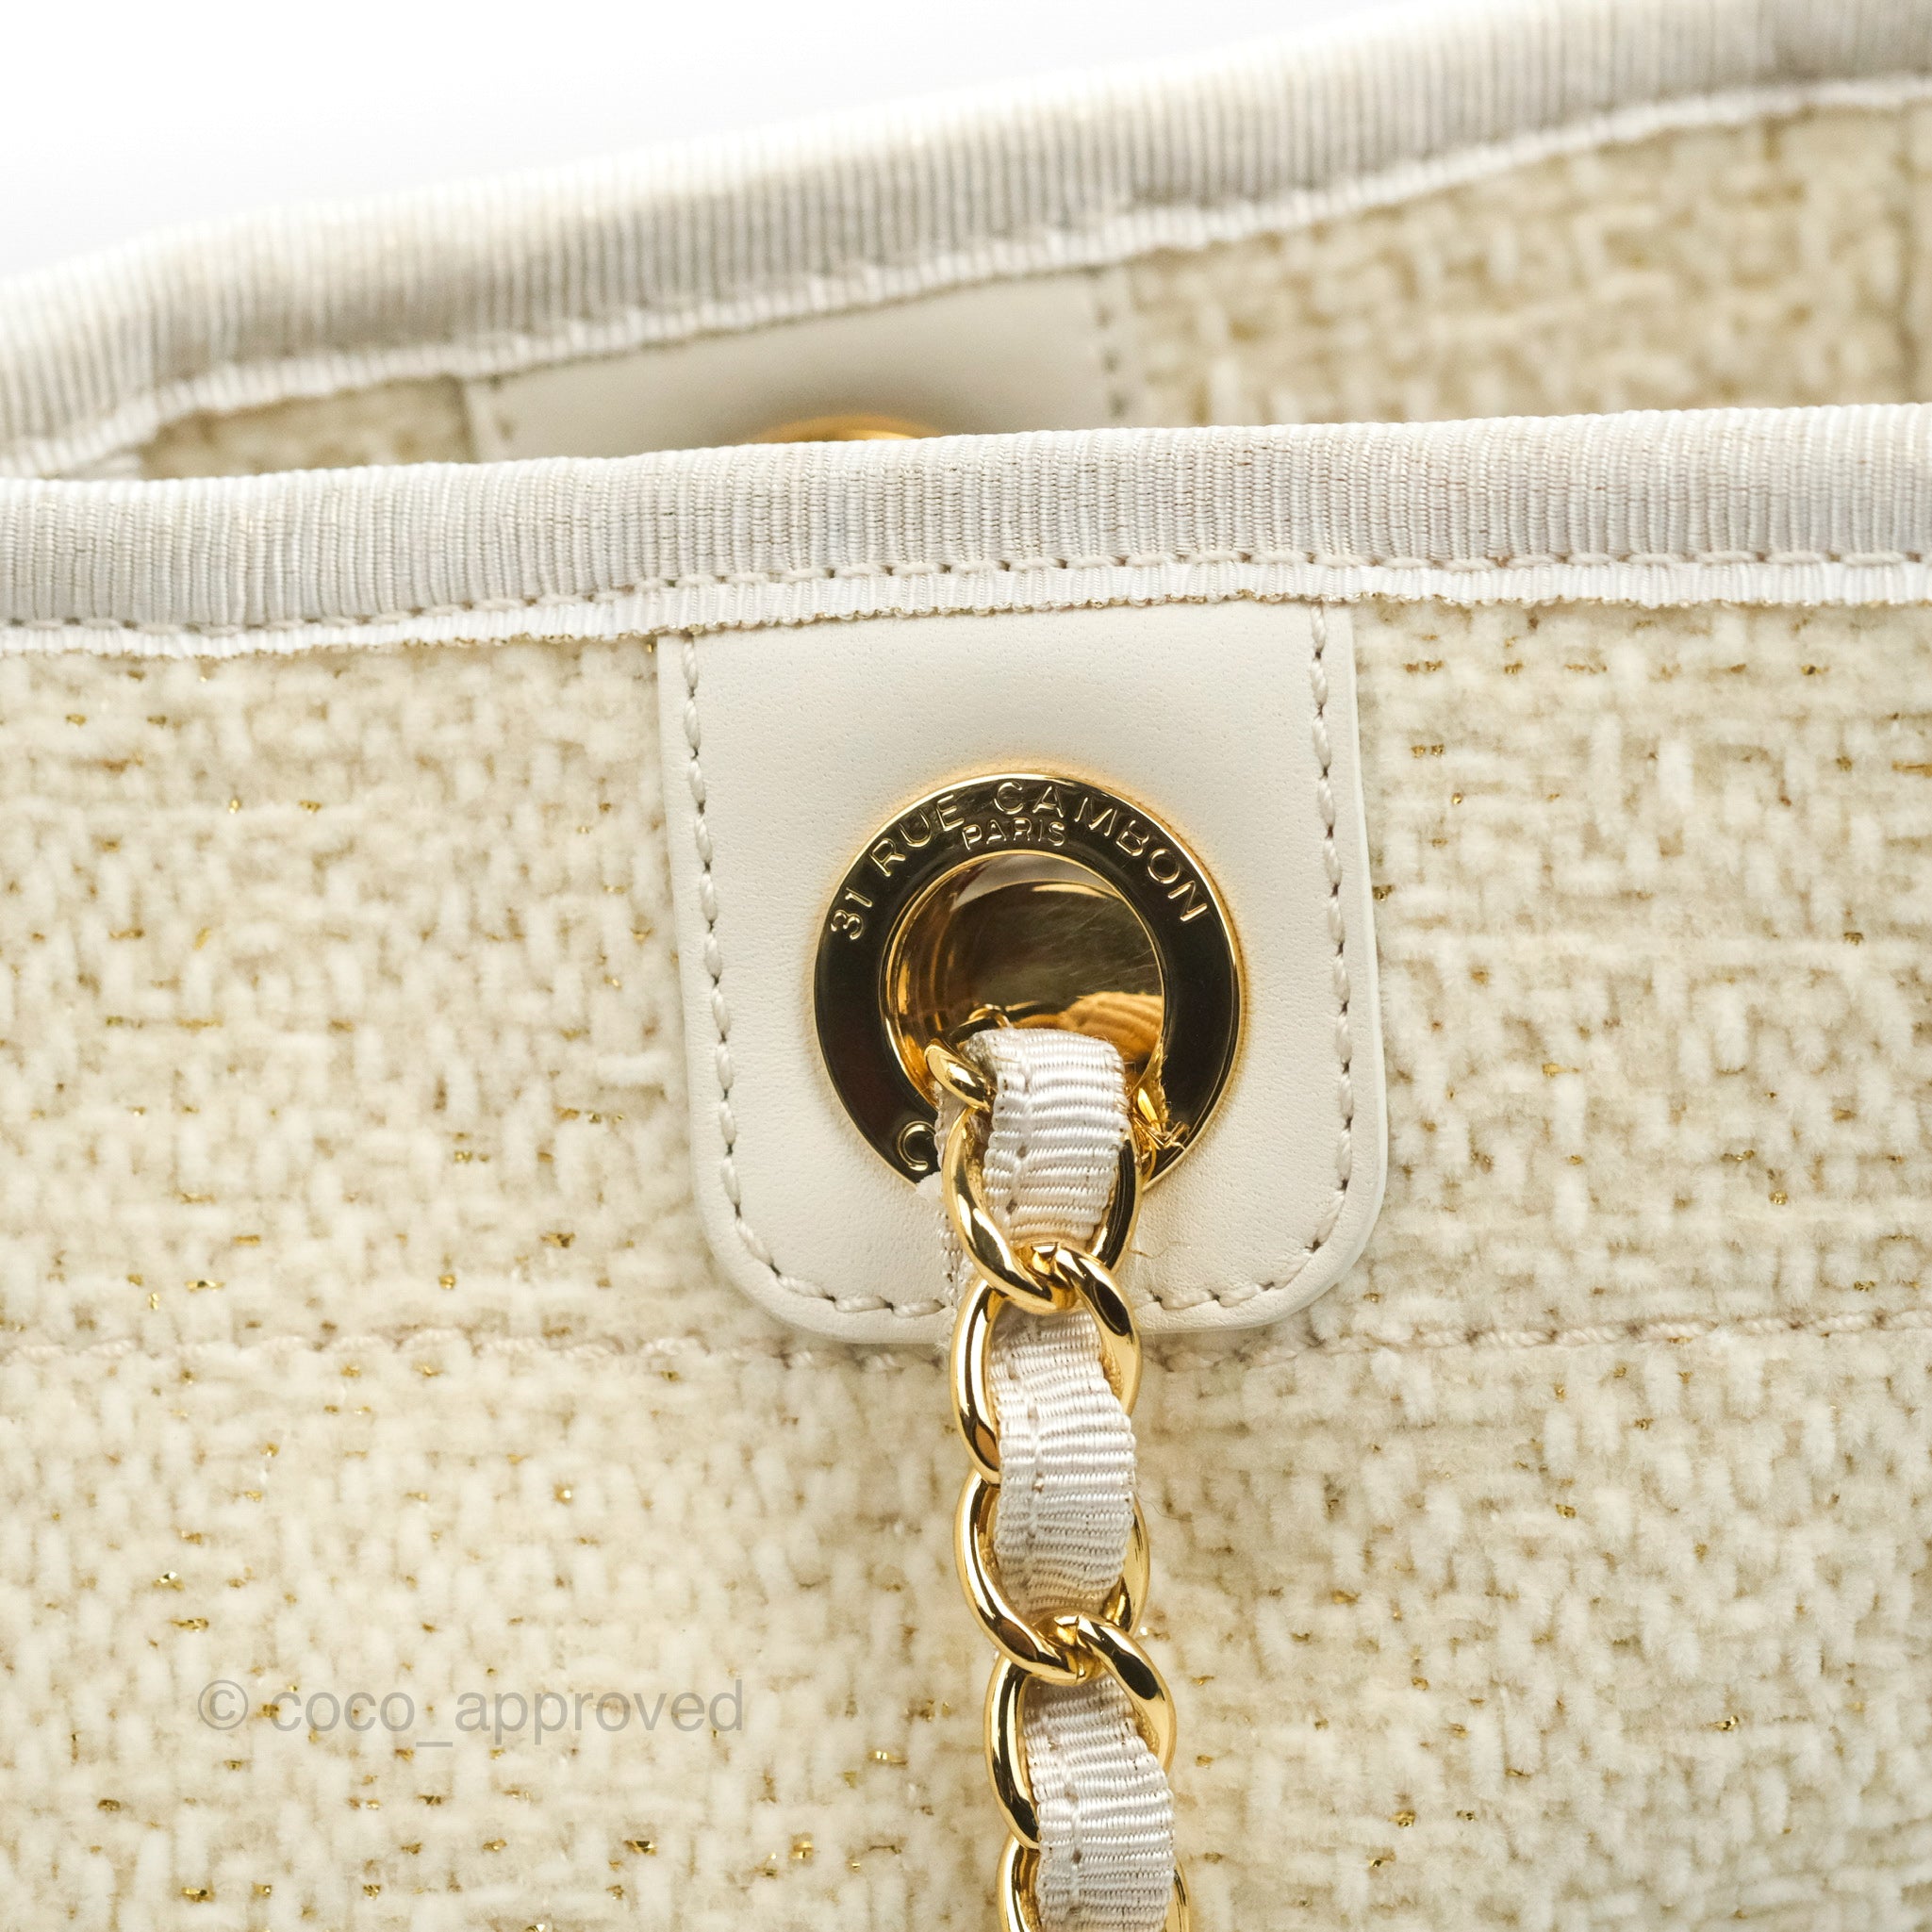 Small White Boucle and Lurex Deauville Tote